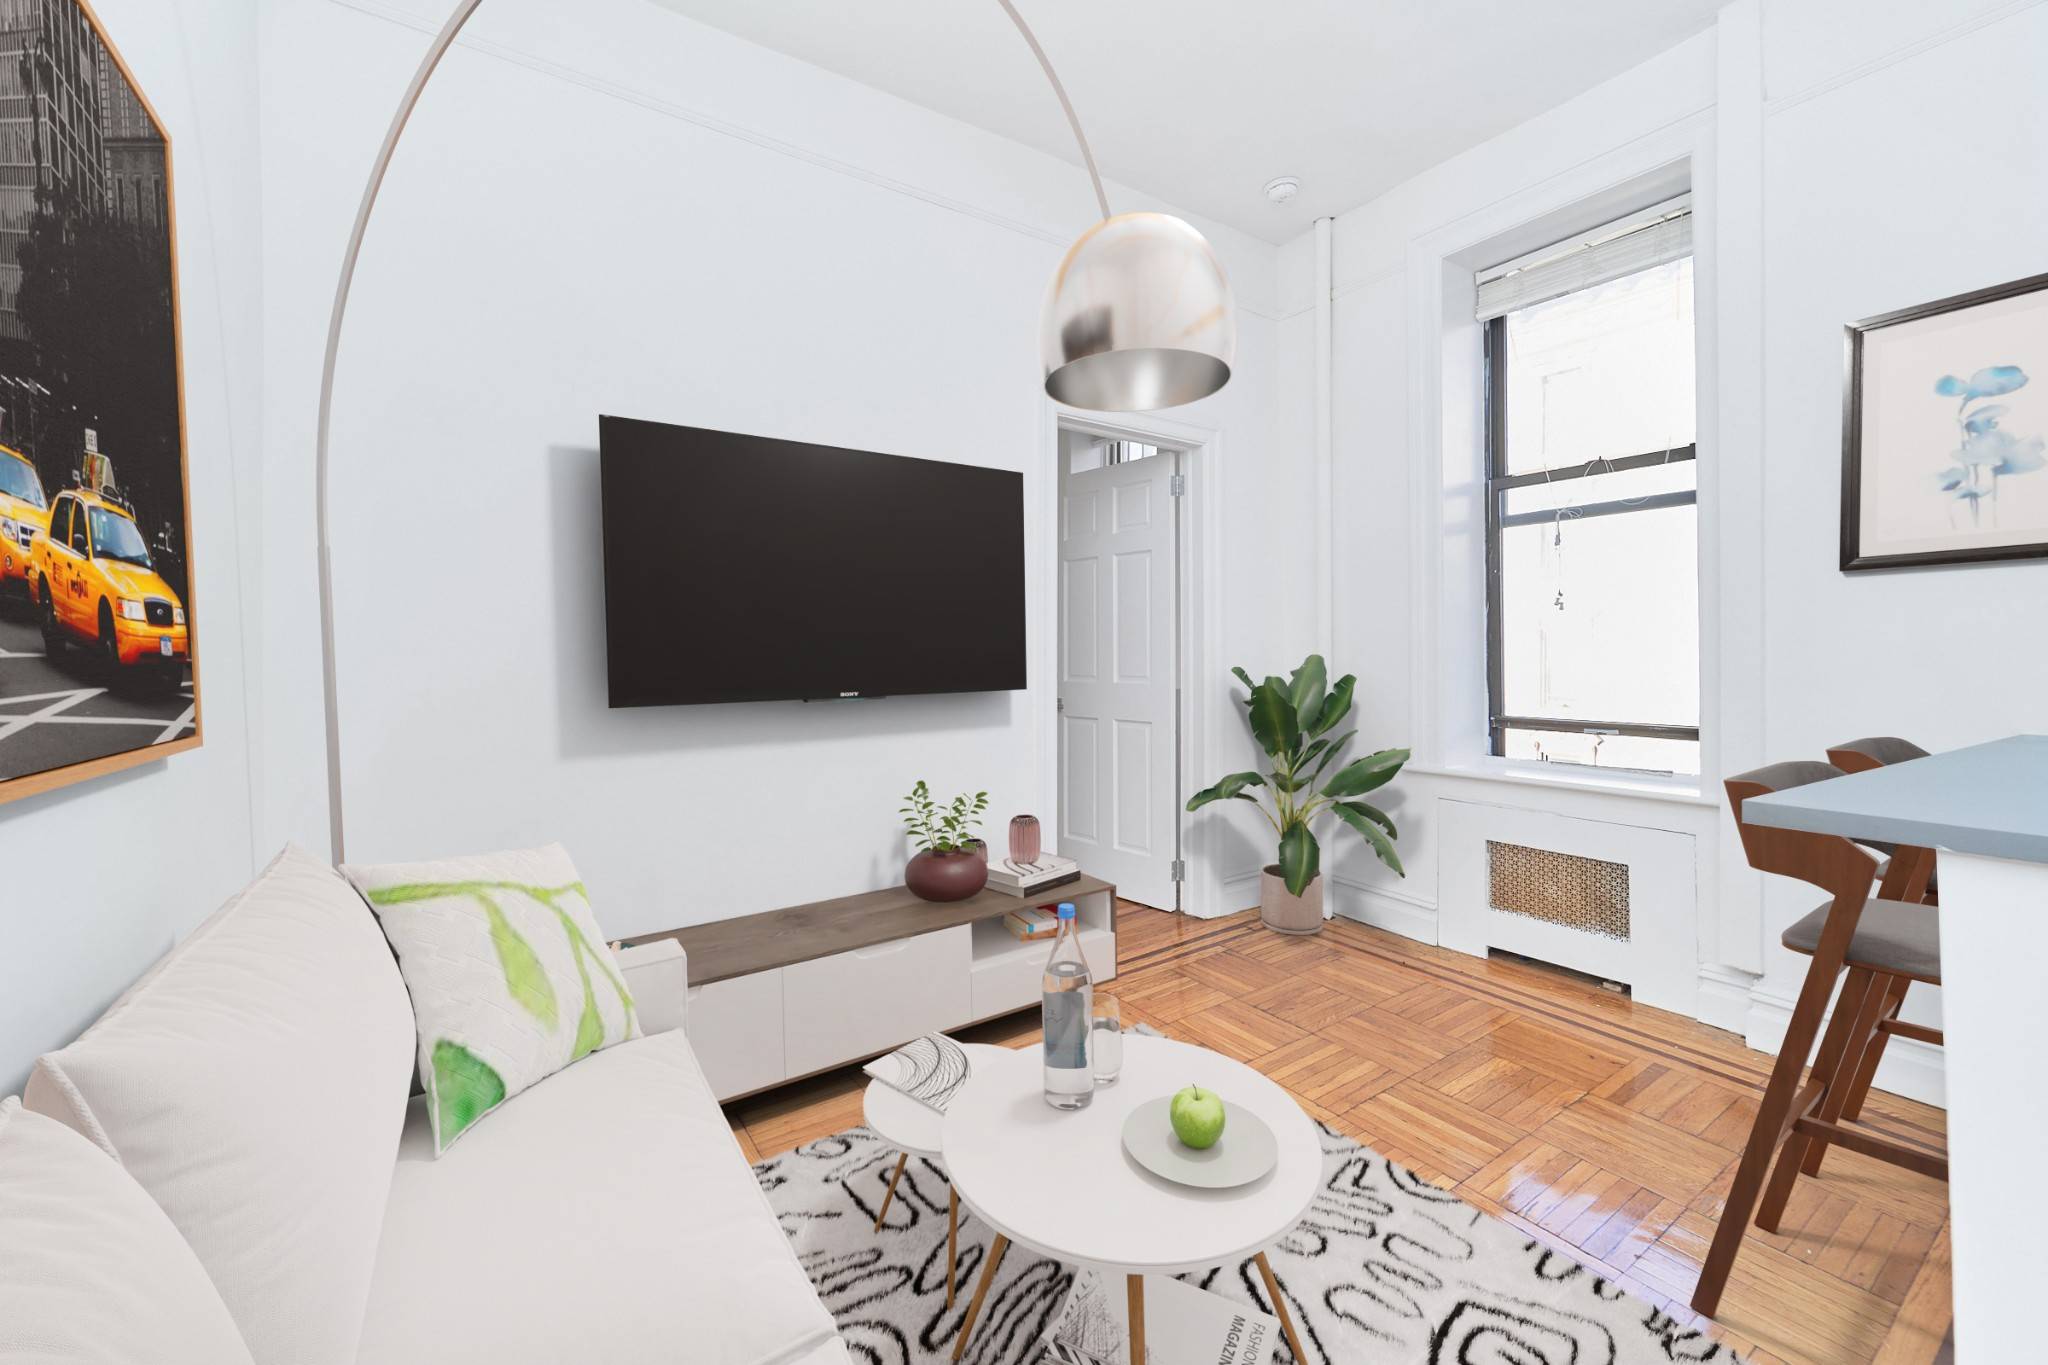 JUST LISTED 1 BED RENOVATED Prime East VillageAPARTMENT DETAILS DishwasherWindowed Open KitchenHigh CeilingsHardwood FloorsNatural SunlightQueen sized bedroomBUILDING amp ; AREA Charming Walk UpHeart of the East VillageGreat Super amp ; ...